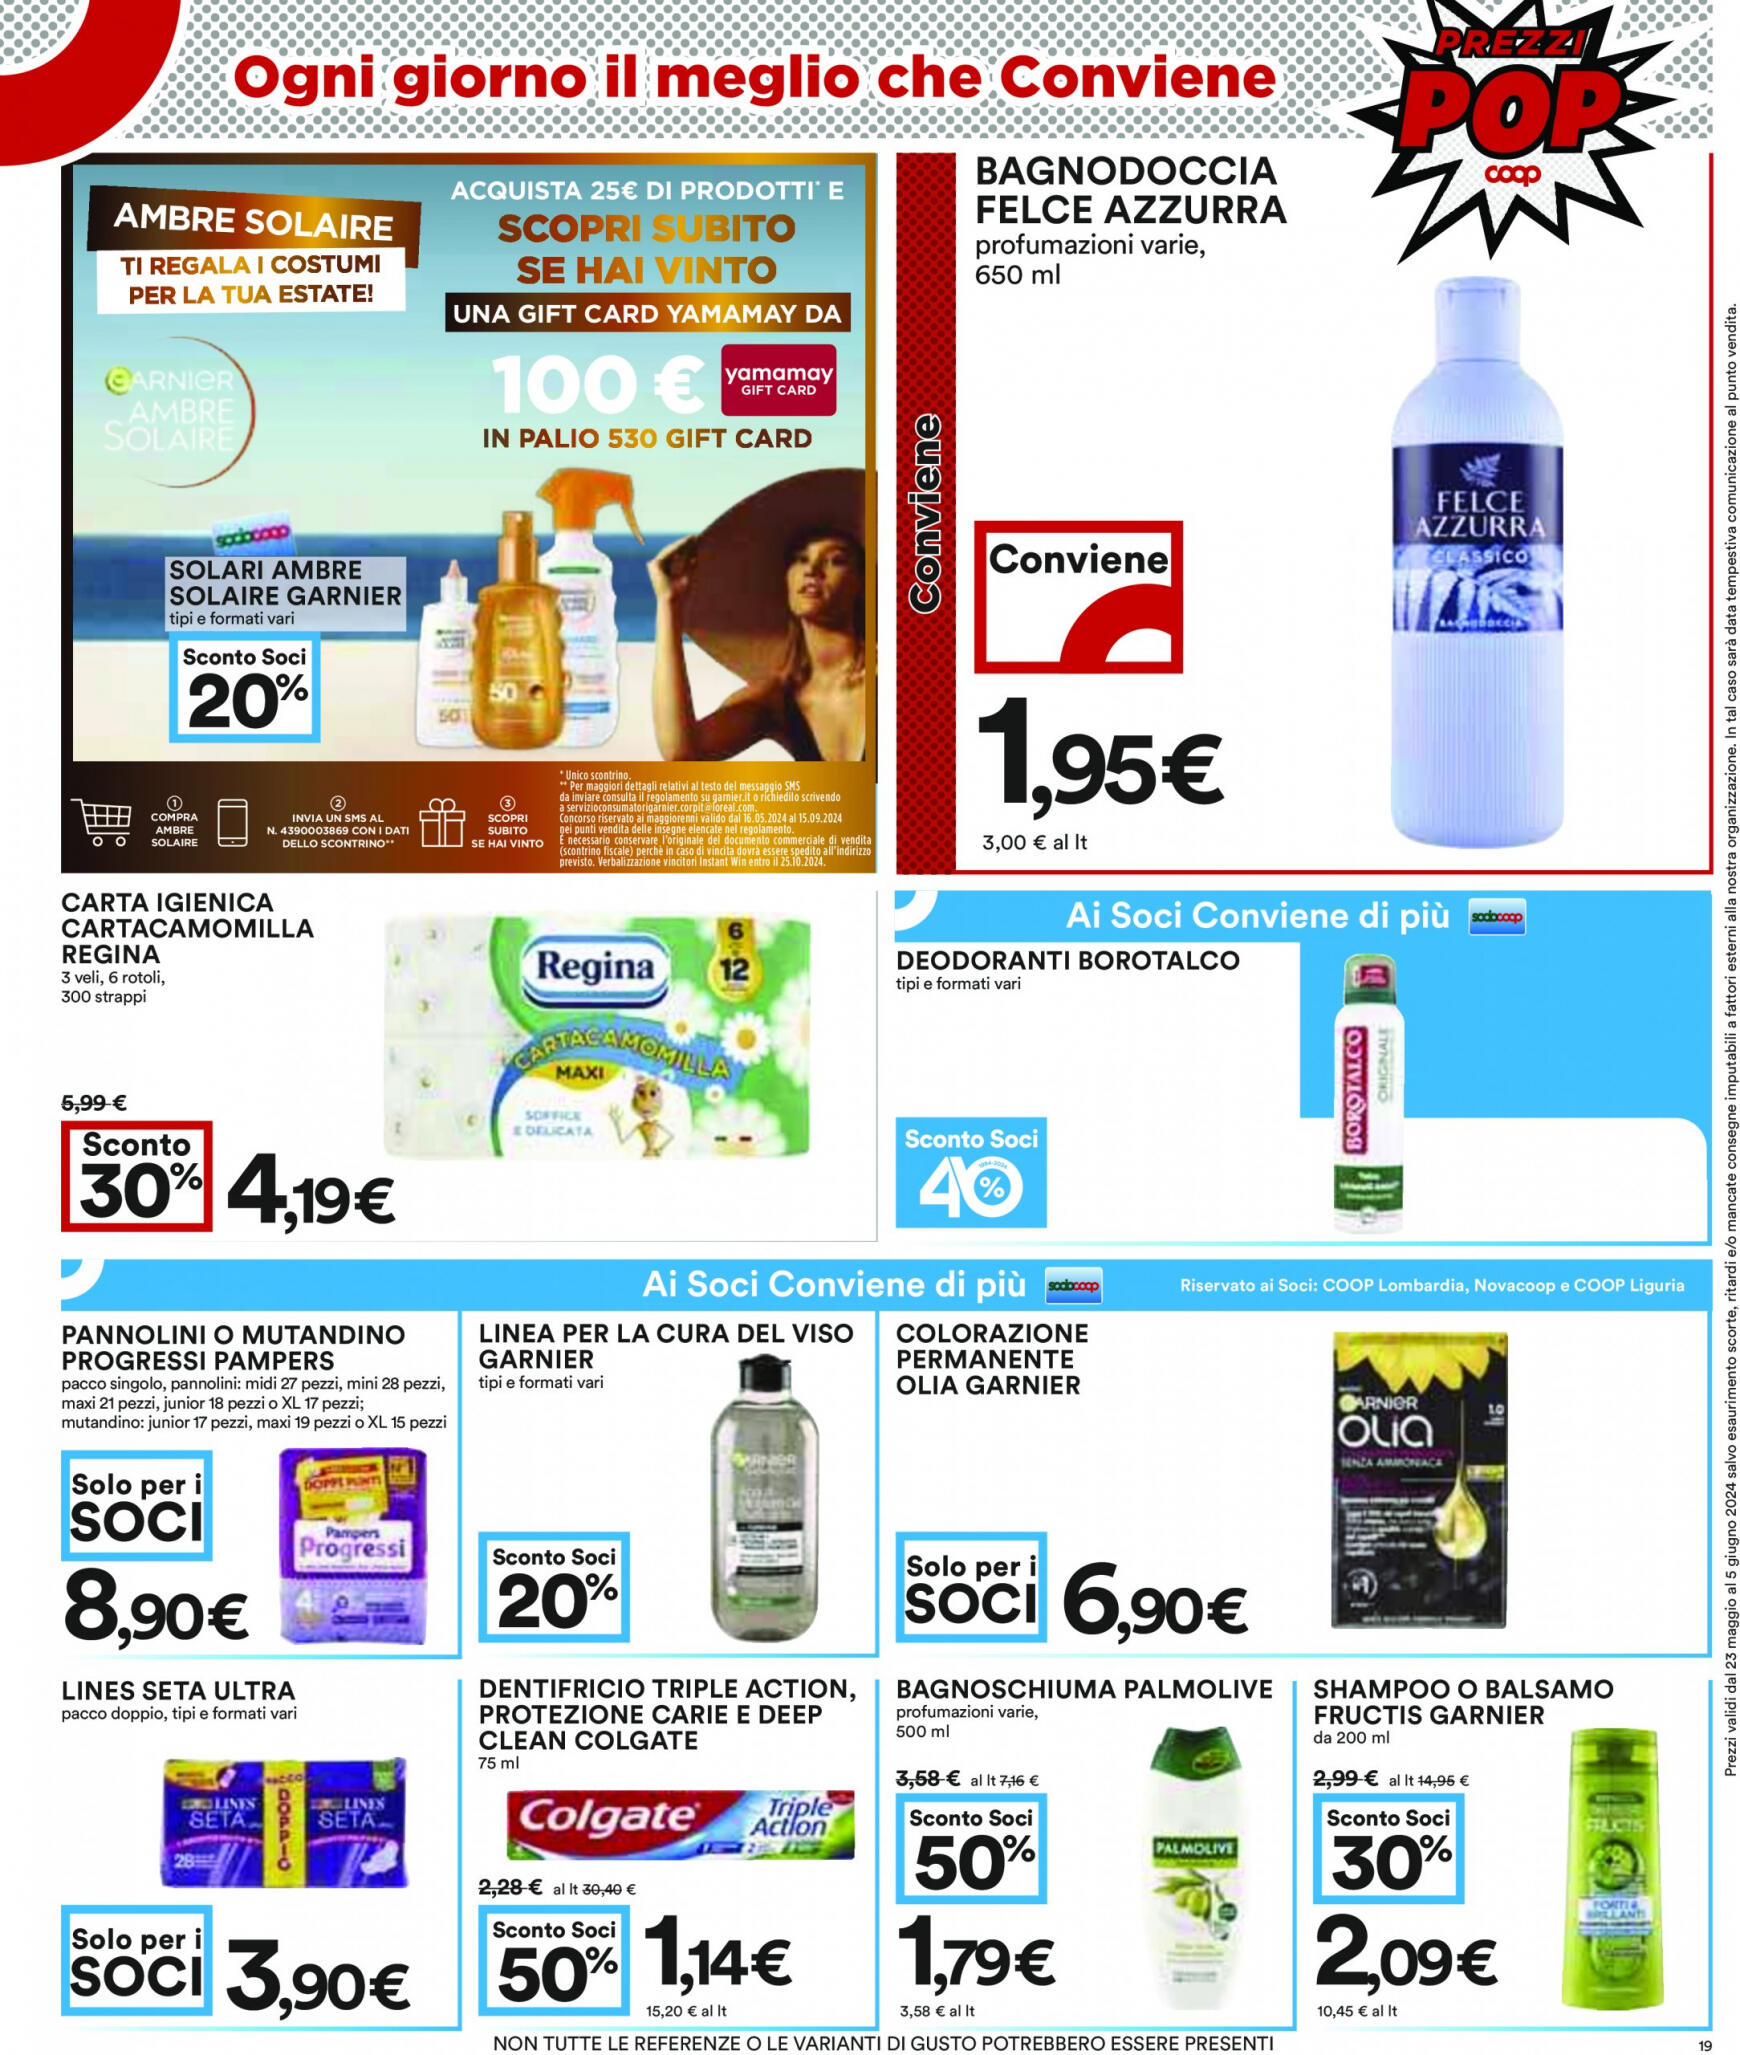 coop - Nuovo volantino Coop 23.05. - 05.06. - page: 19